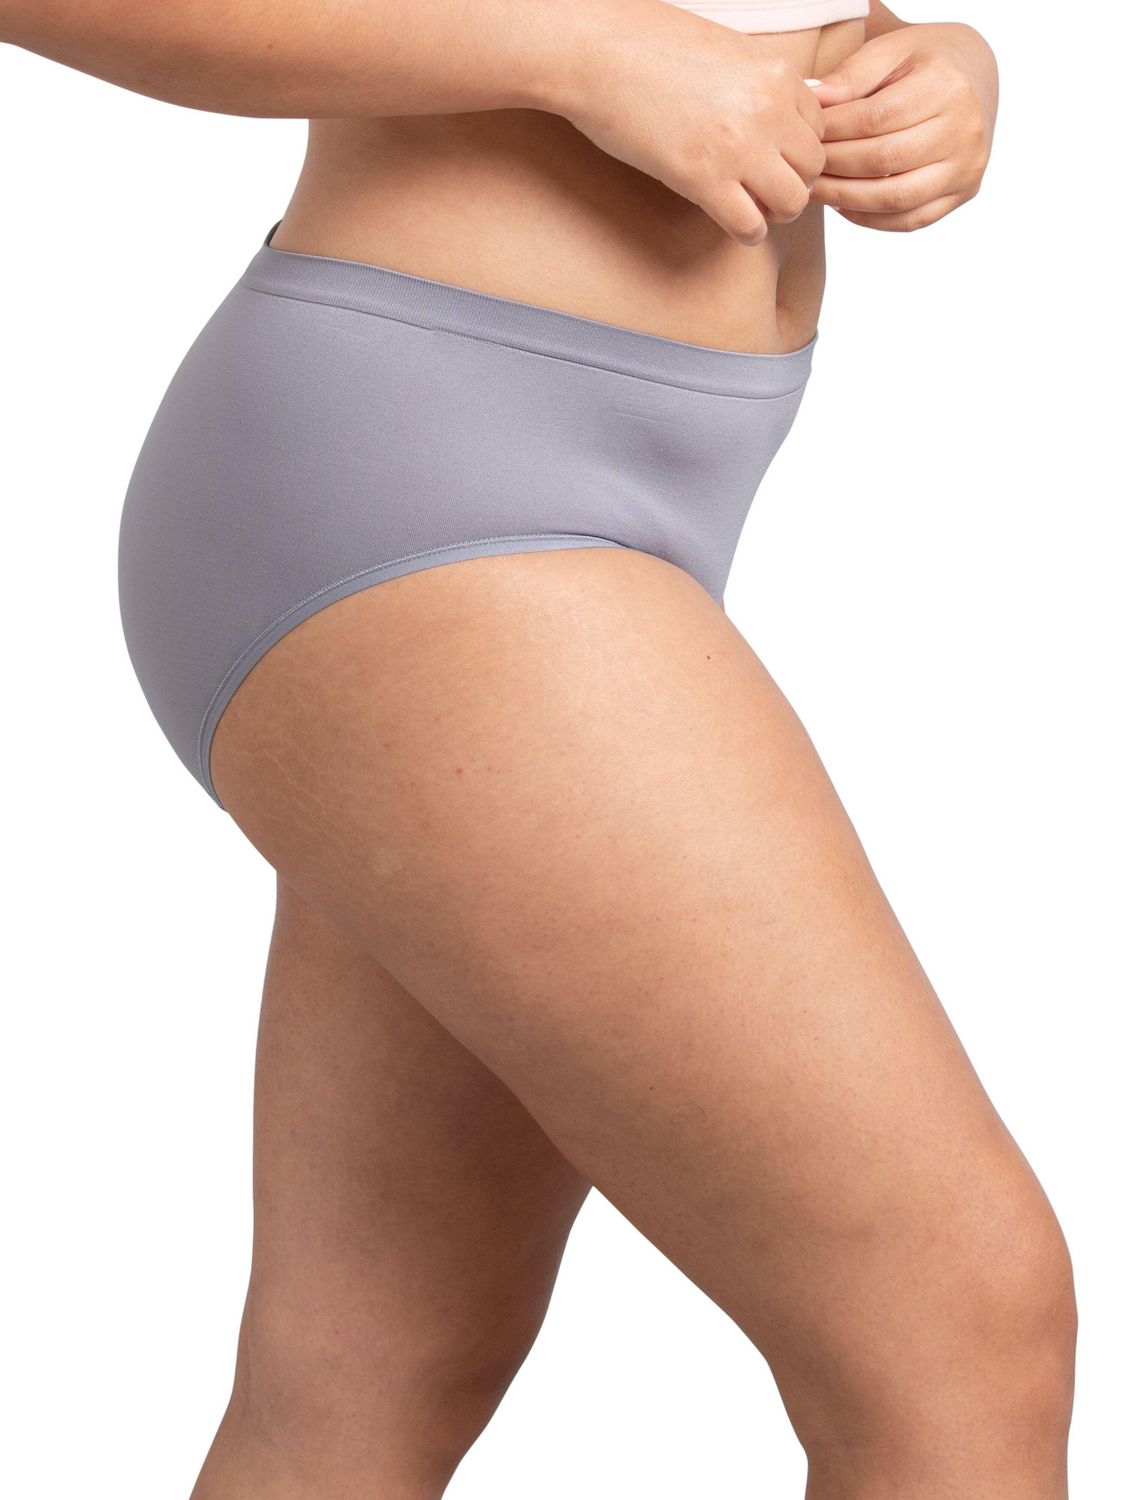 Fruit of the Loom 360 Stretch Seamless Low-Rise Brief Panty, 4